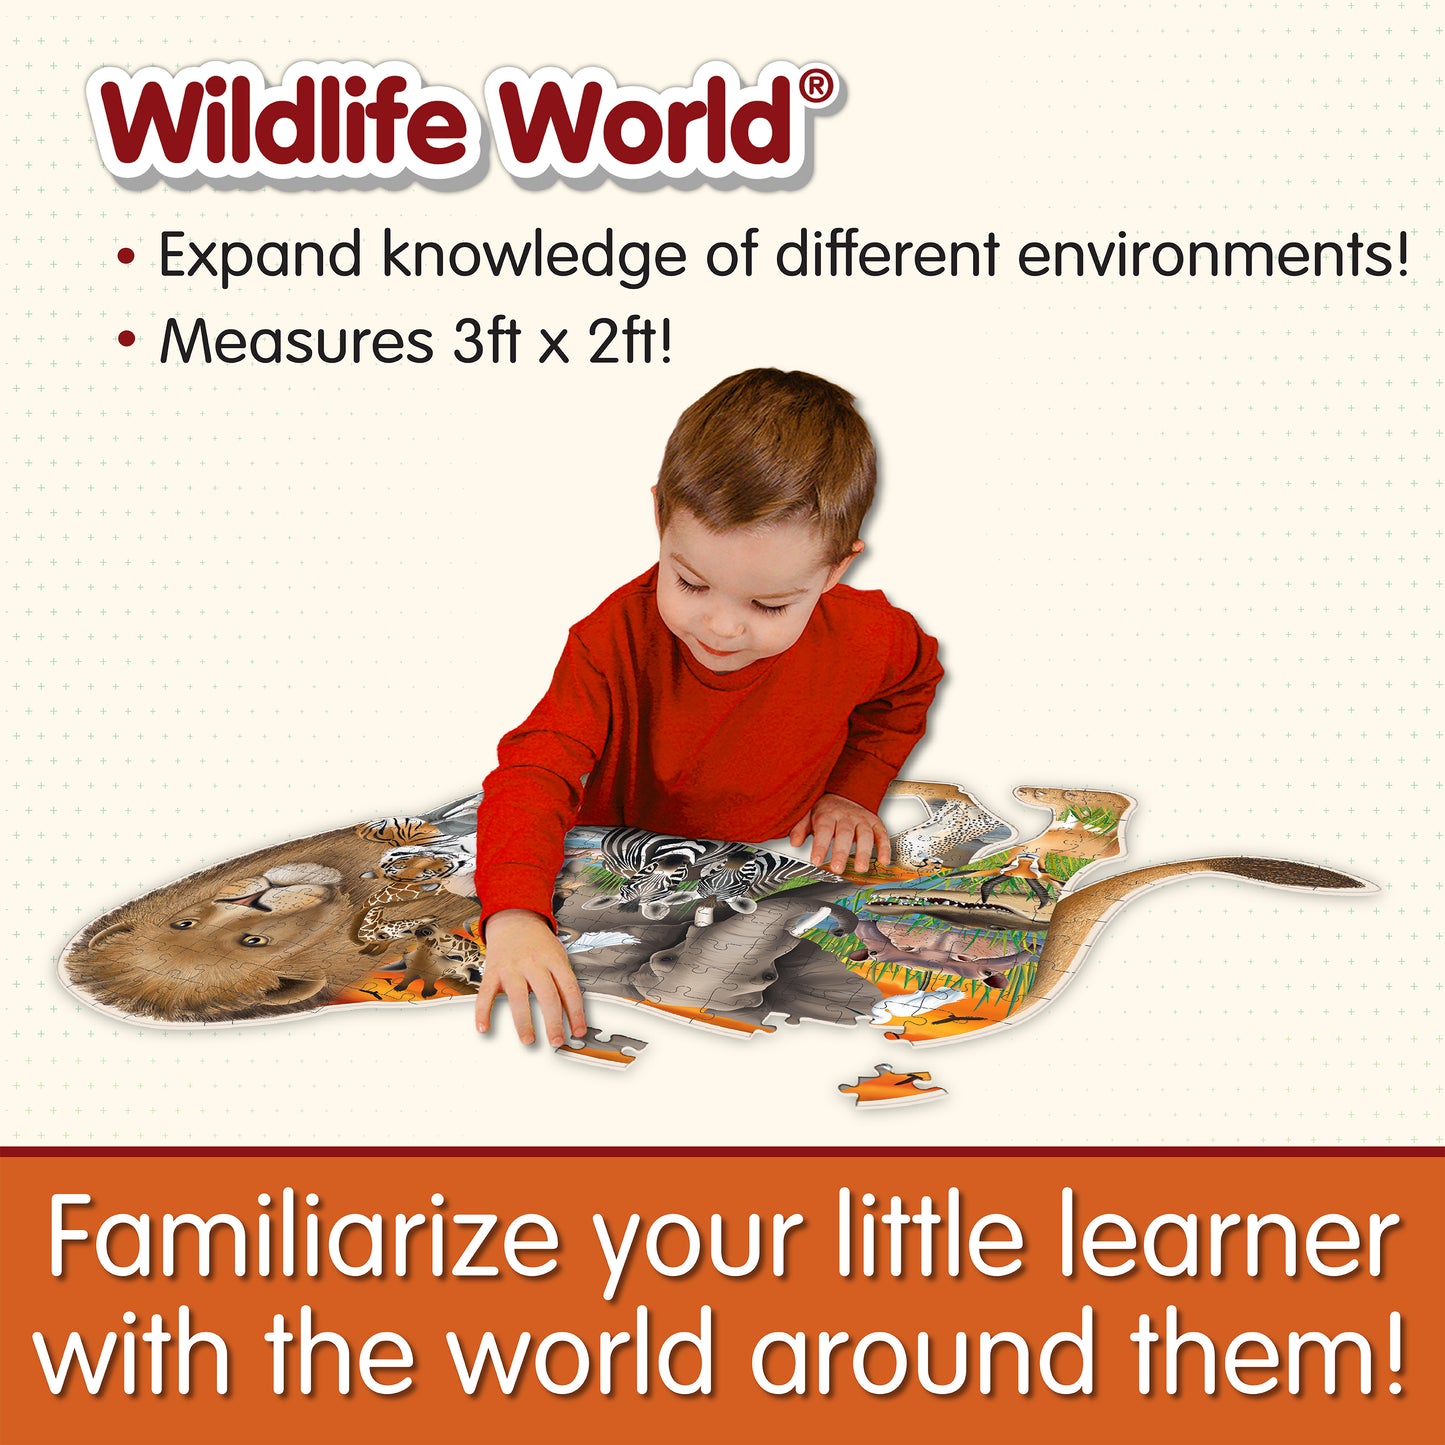 Infographic about Wildlife World Safari Puzzle that says, "Familiarize your little learner with the world around them!"